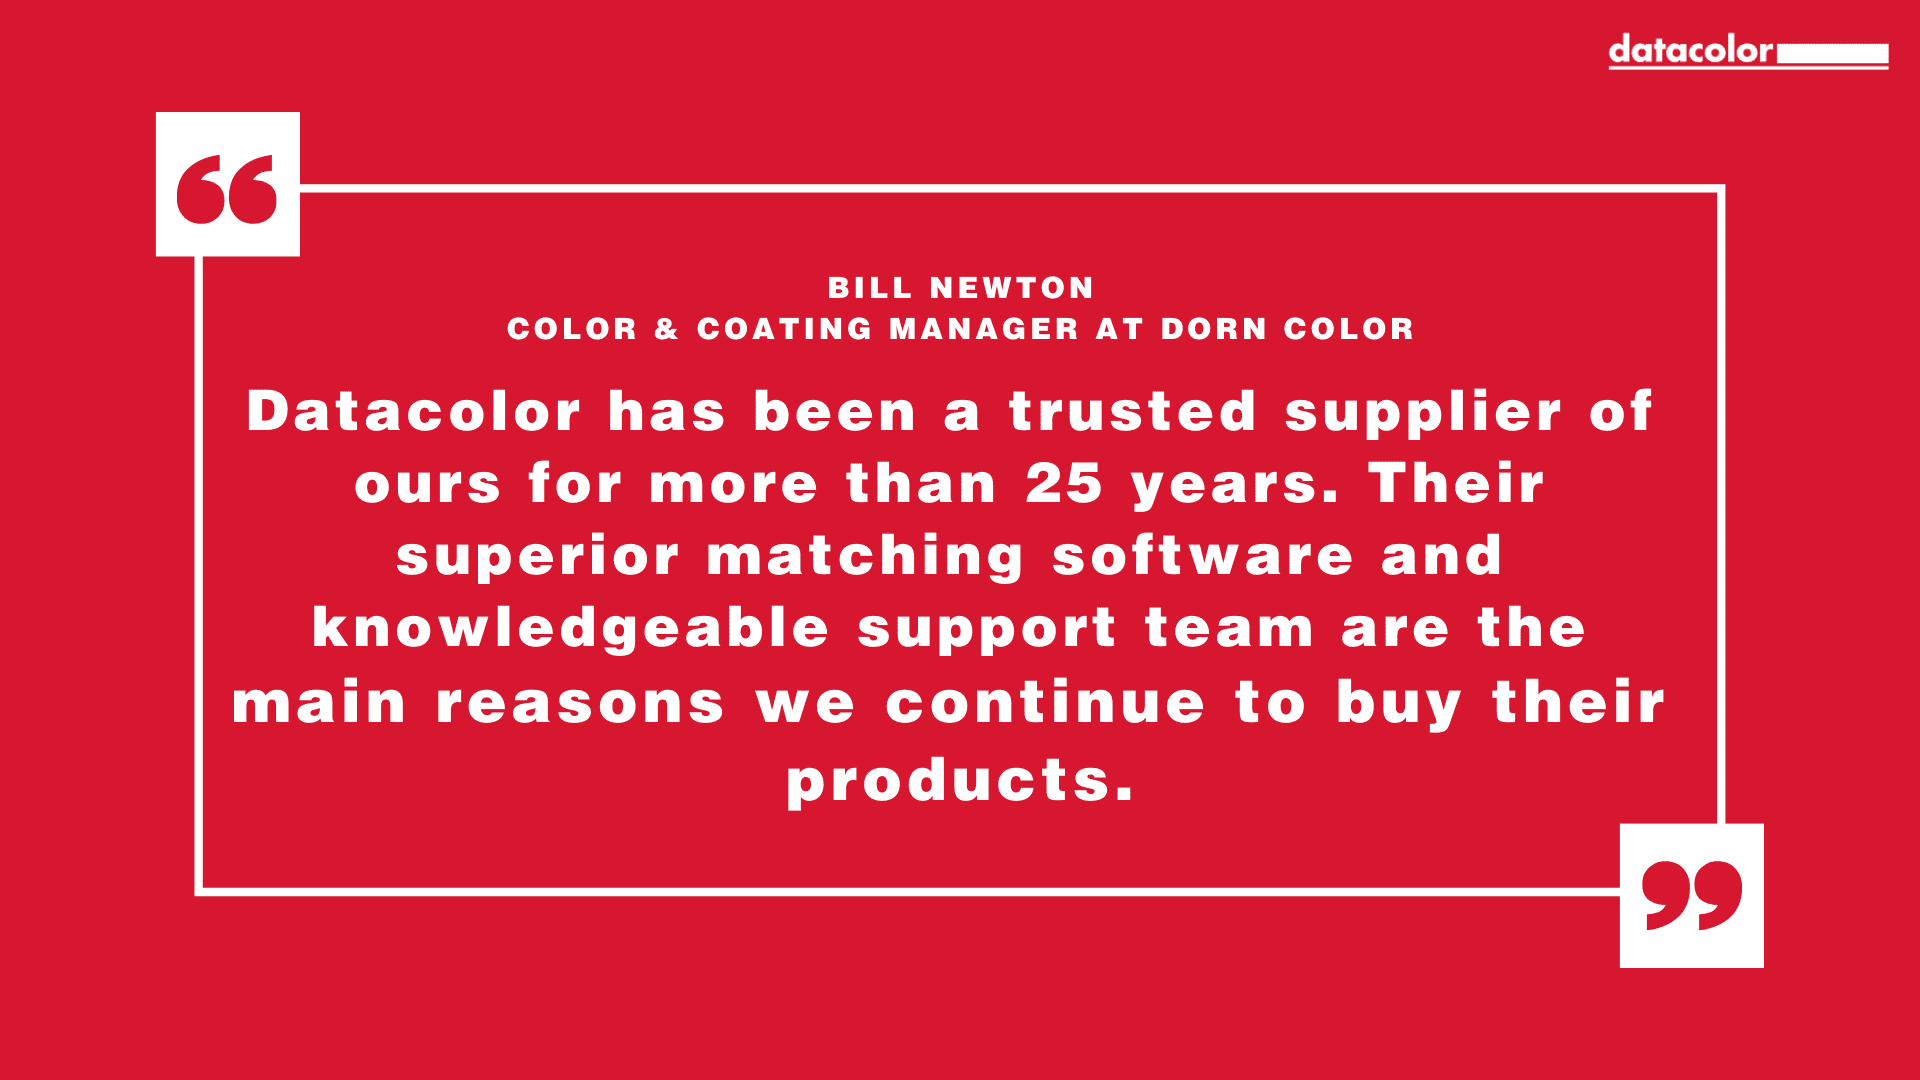 Zitat von Bill Newton, Color and Coatings Manager bei Dorn Color